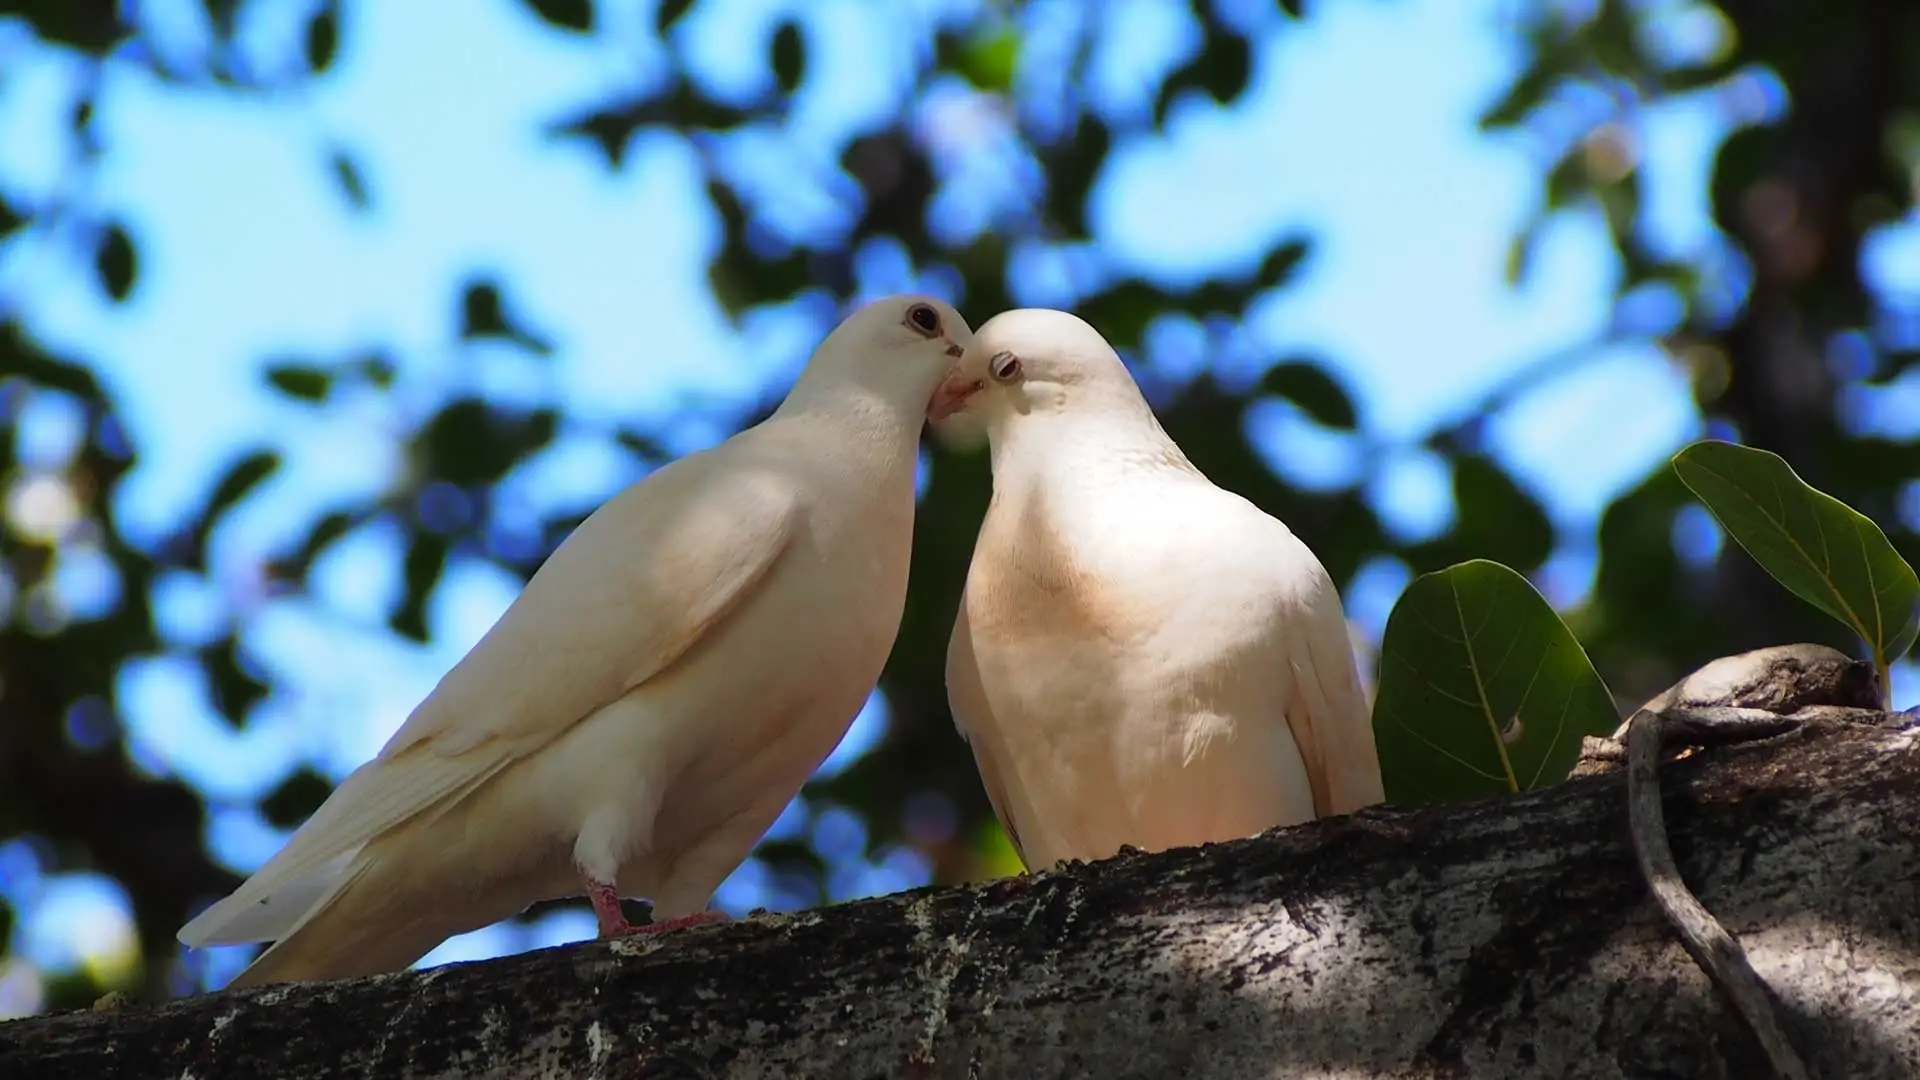 Two of our white doves sitting on a tree branch.